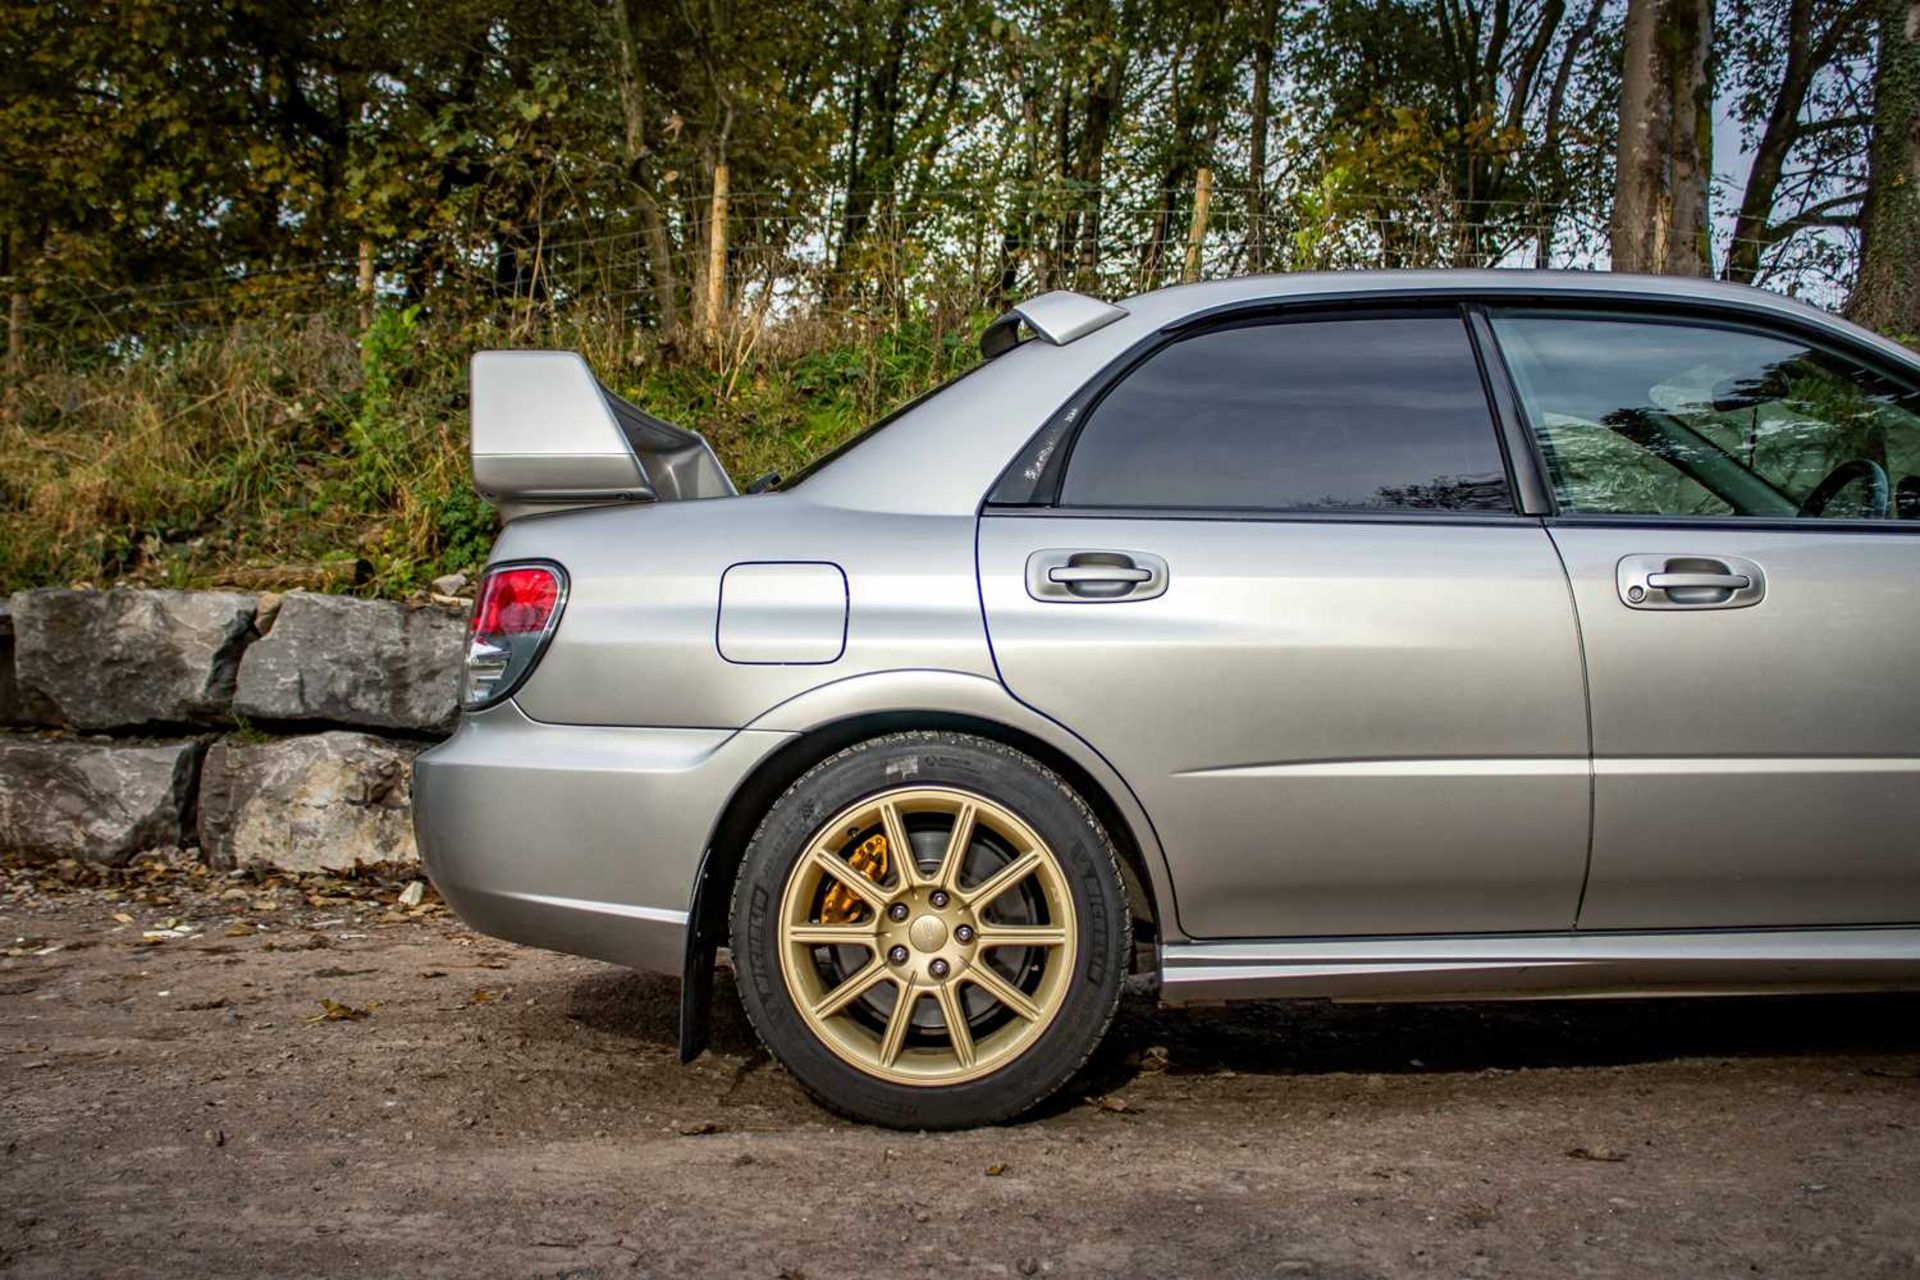 2006 Subaru Impreza WRX STi Featuring a plethora of desirable upgrades, supported by a dyno printout - Image 29 of 103